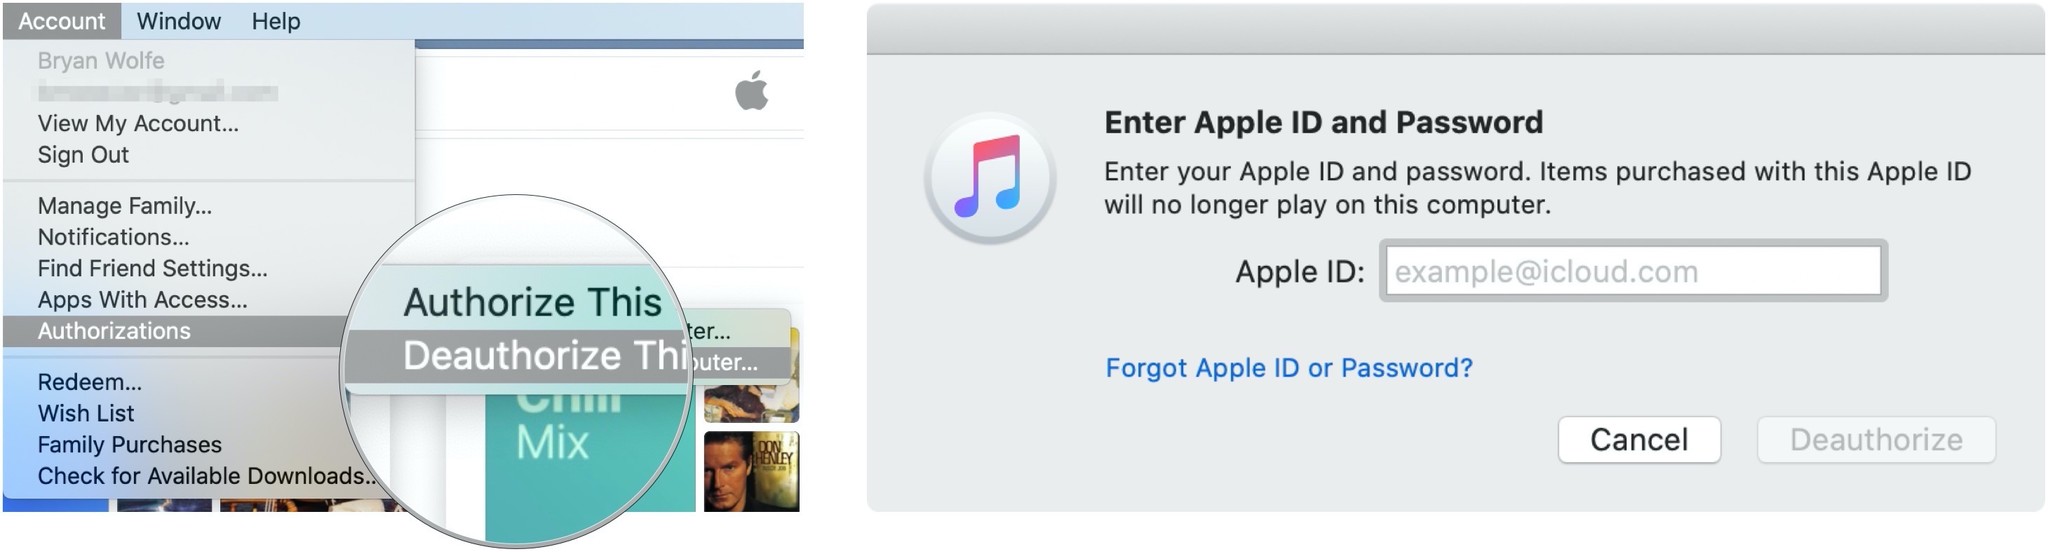 To sign out of Music, click Deauthorize This Computer. Enter your Apple ID and password, then choose Deauthorize.